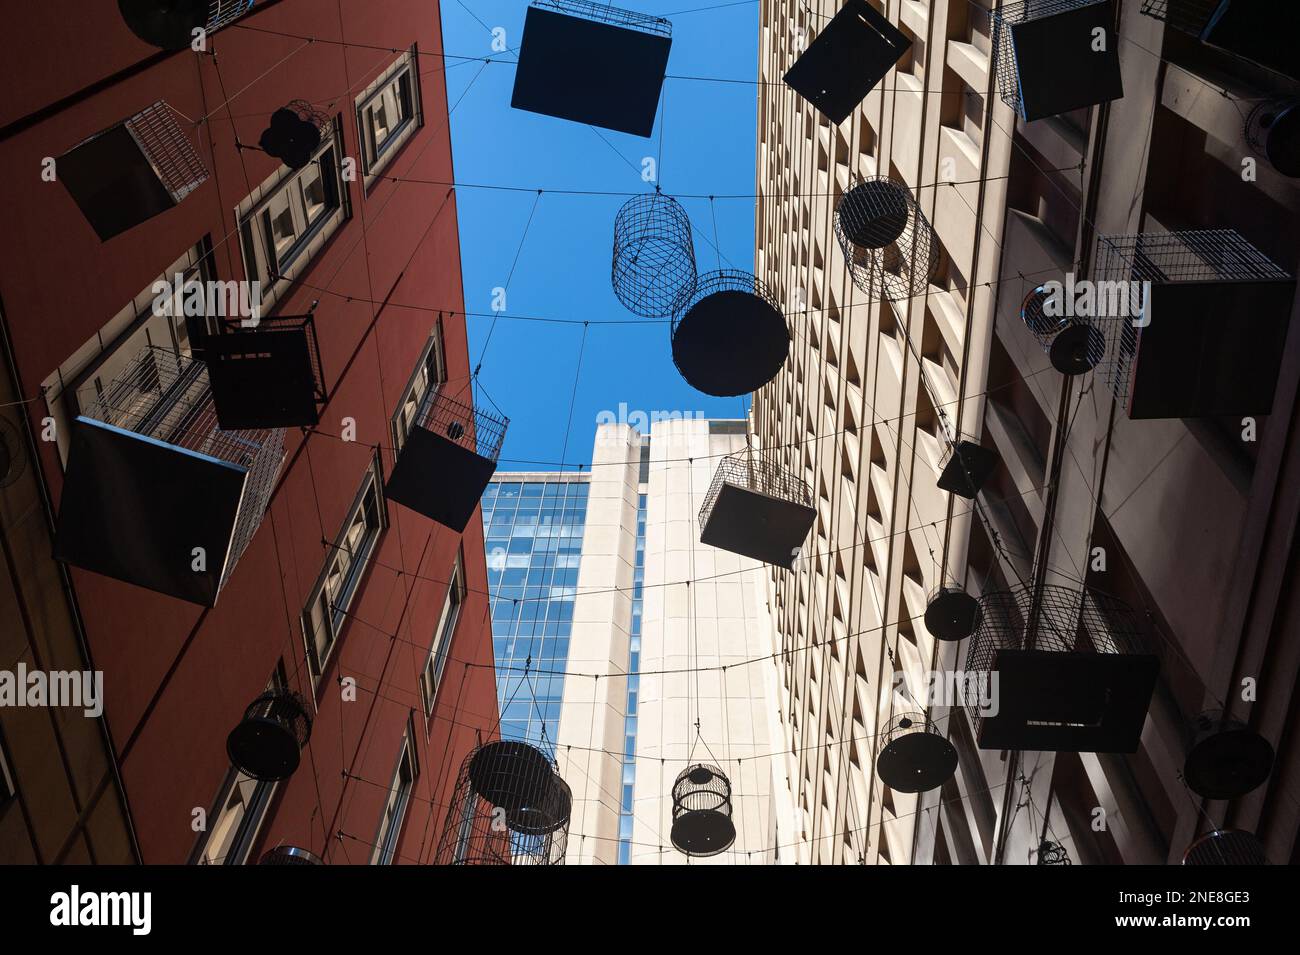 22.09.2019, Sydney, New South Wales, Australia - Art installation 'Forgotten Songs' in Angel Place of hanging birdcages commemorates former habitat. Stock Photo